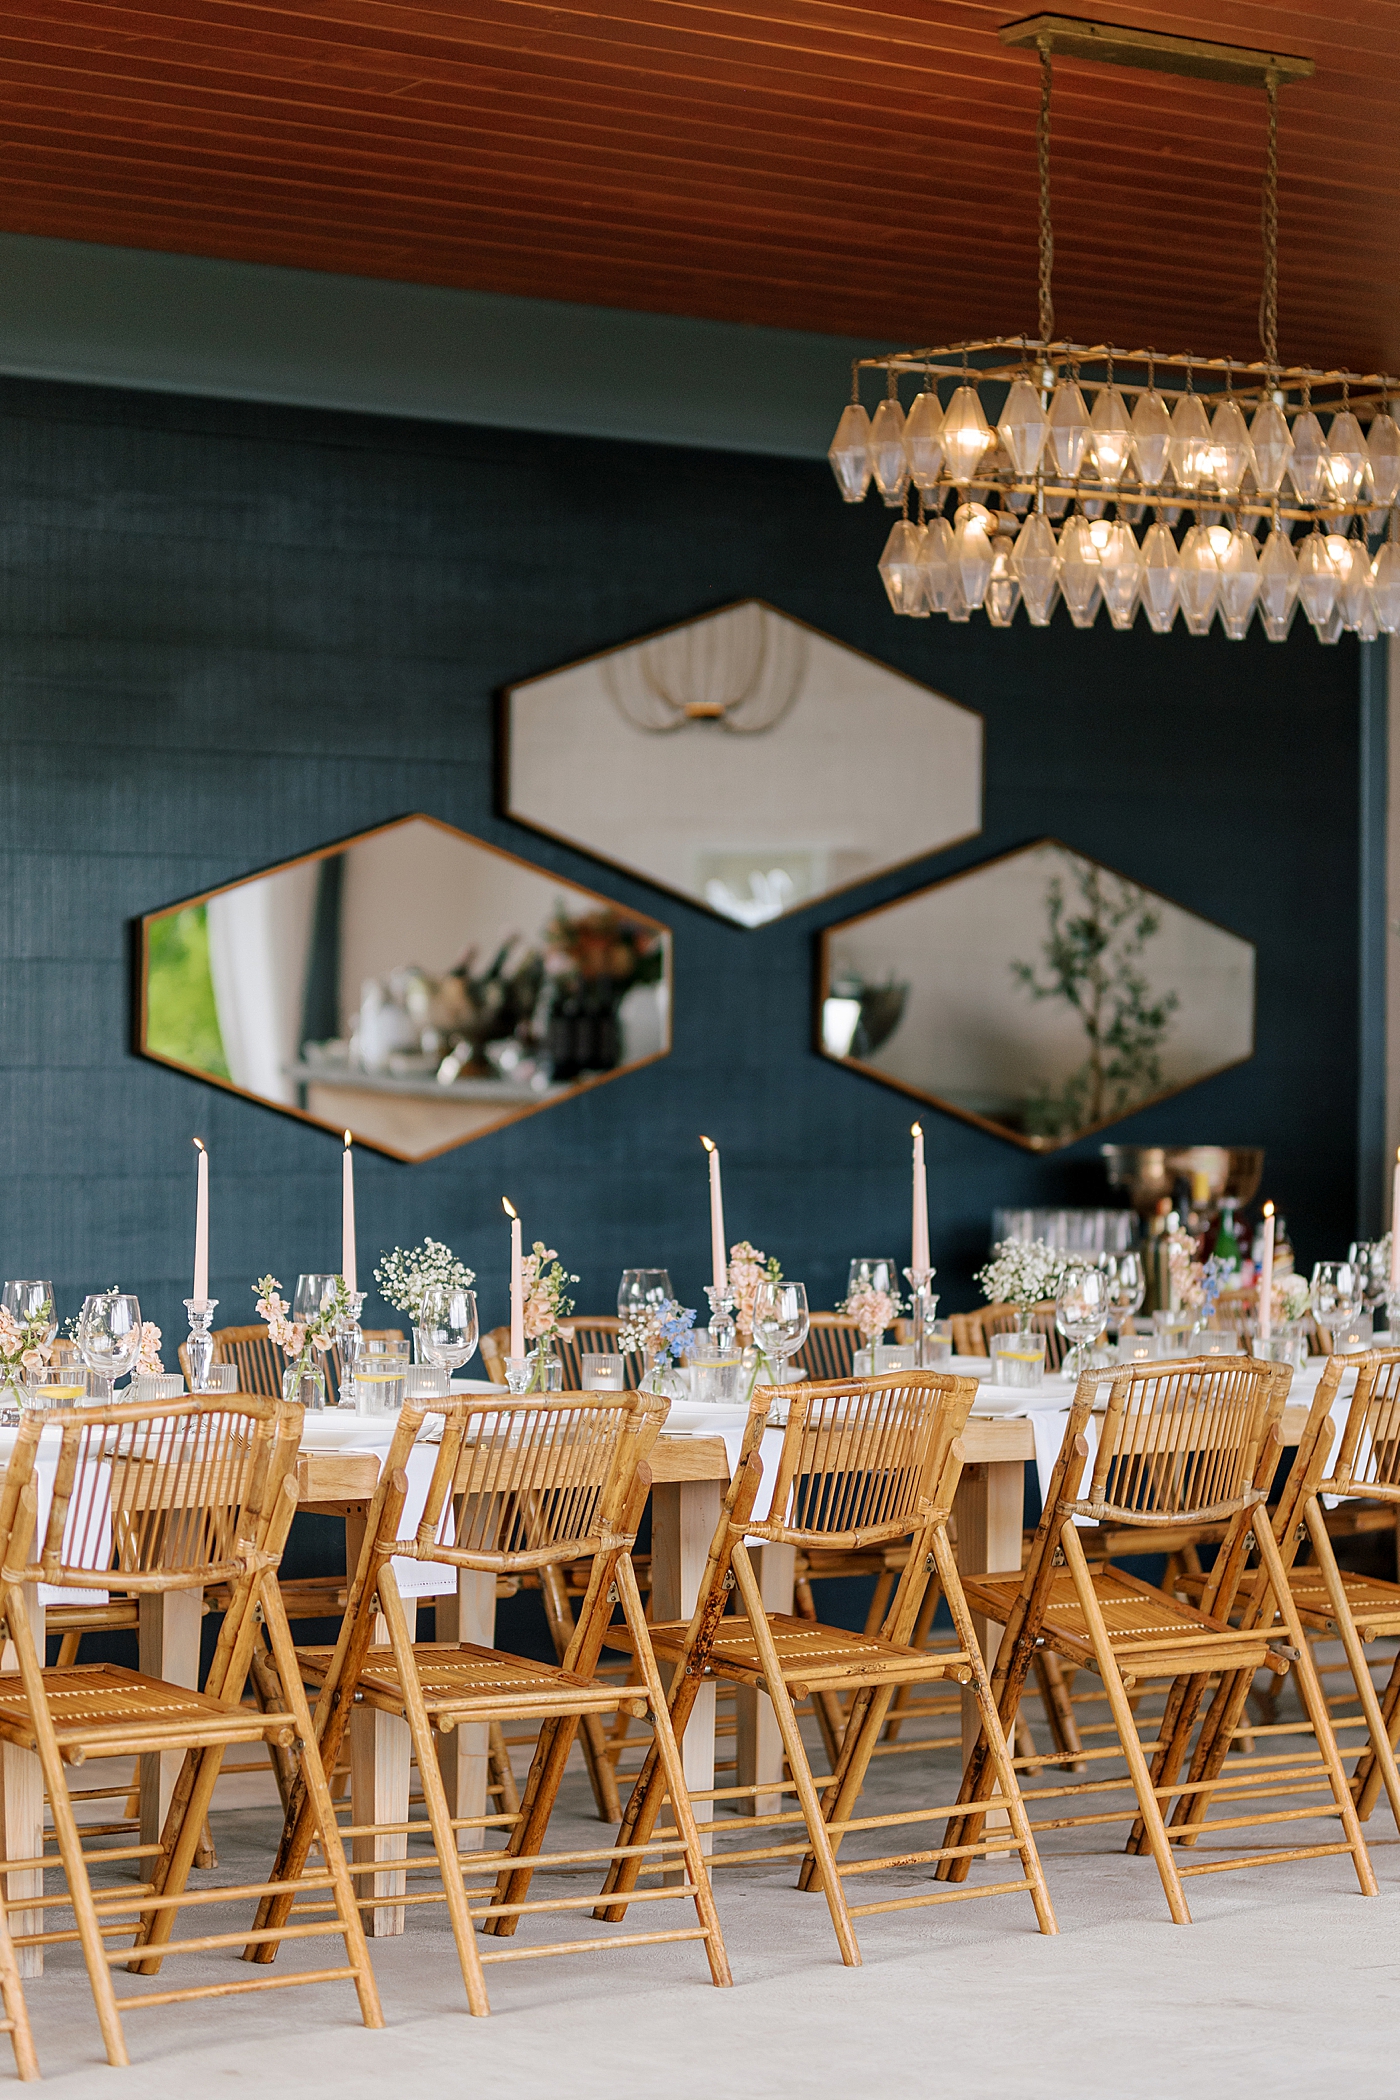 Details of wedding reception tables with mirrors, flowers and chairs during Promise Ridge Wedding | Image by Hope Helmuth Photography 